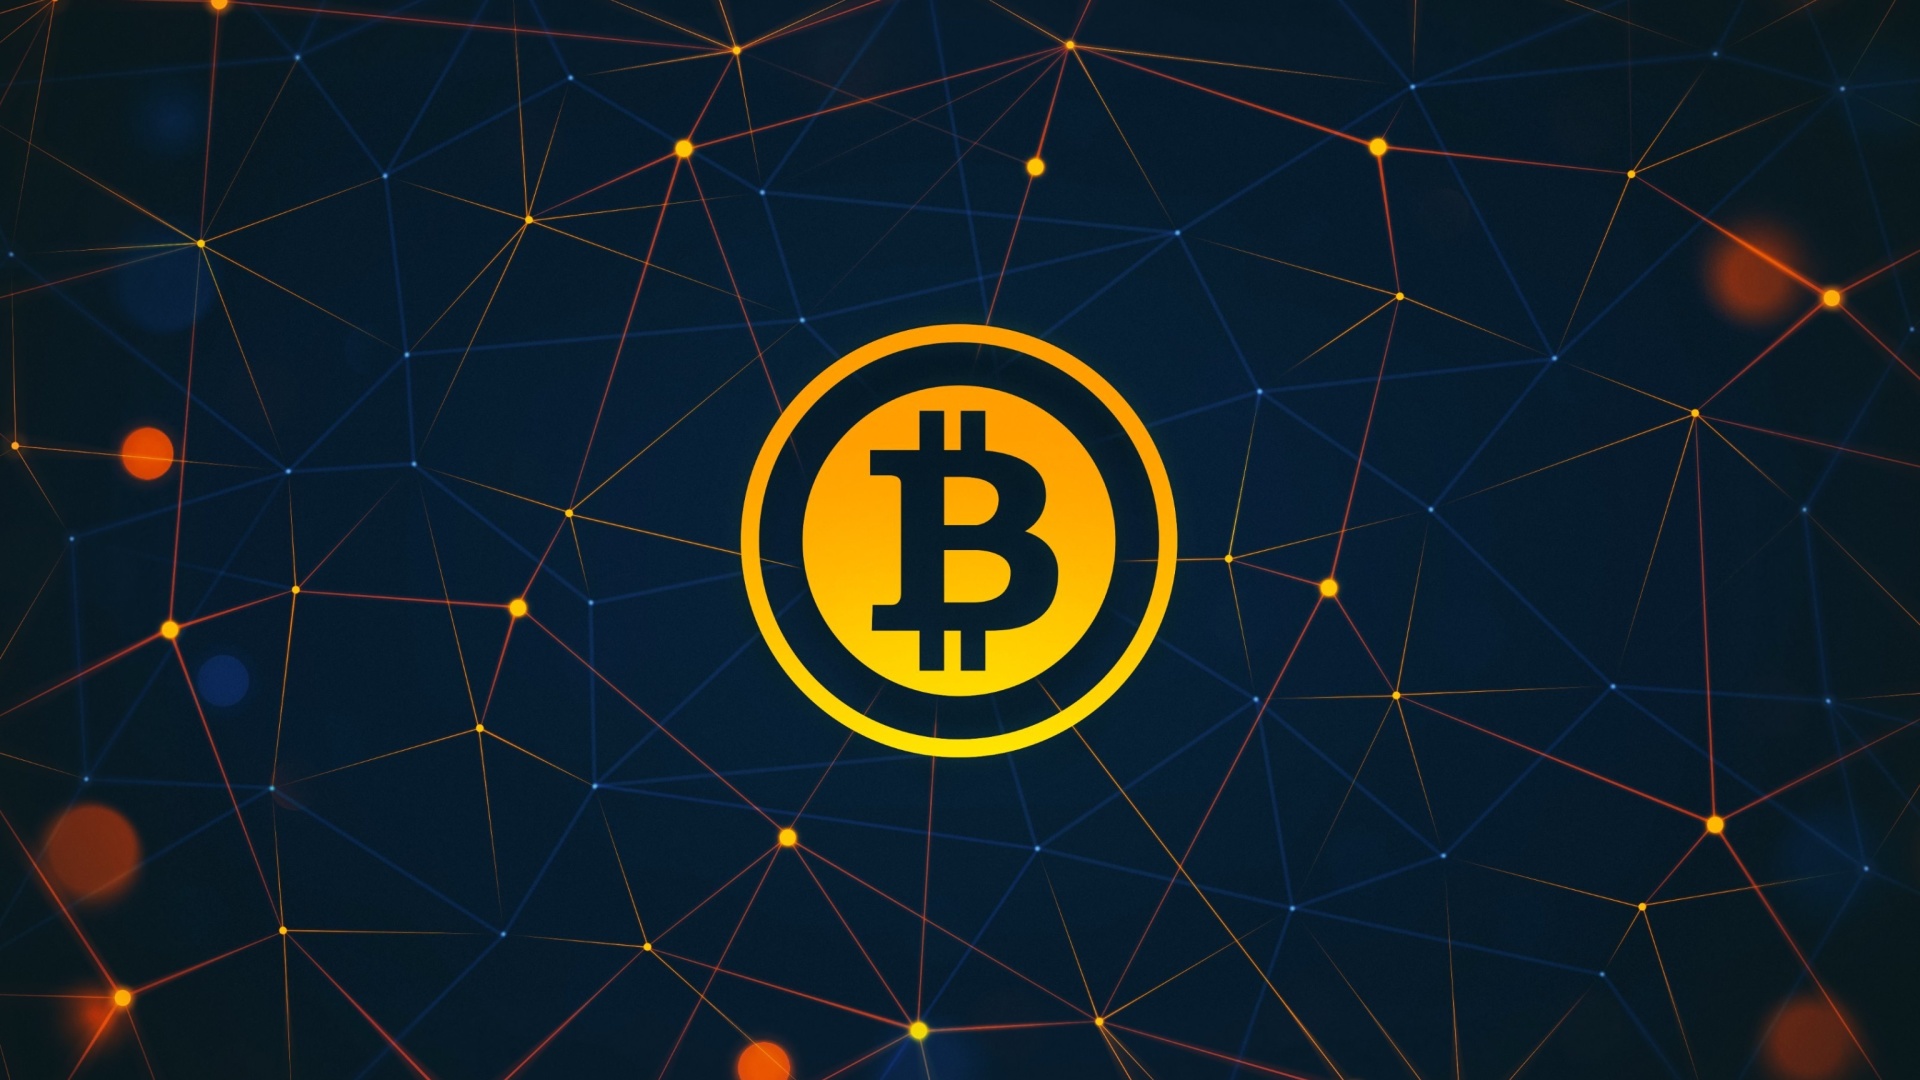 Bitcoin Cryptocurrency wallpaper 1920x1080